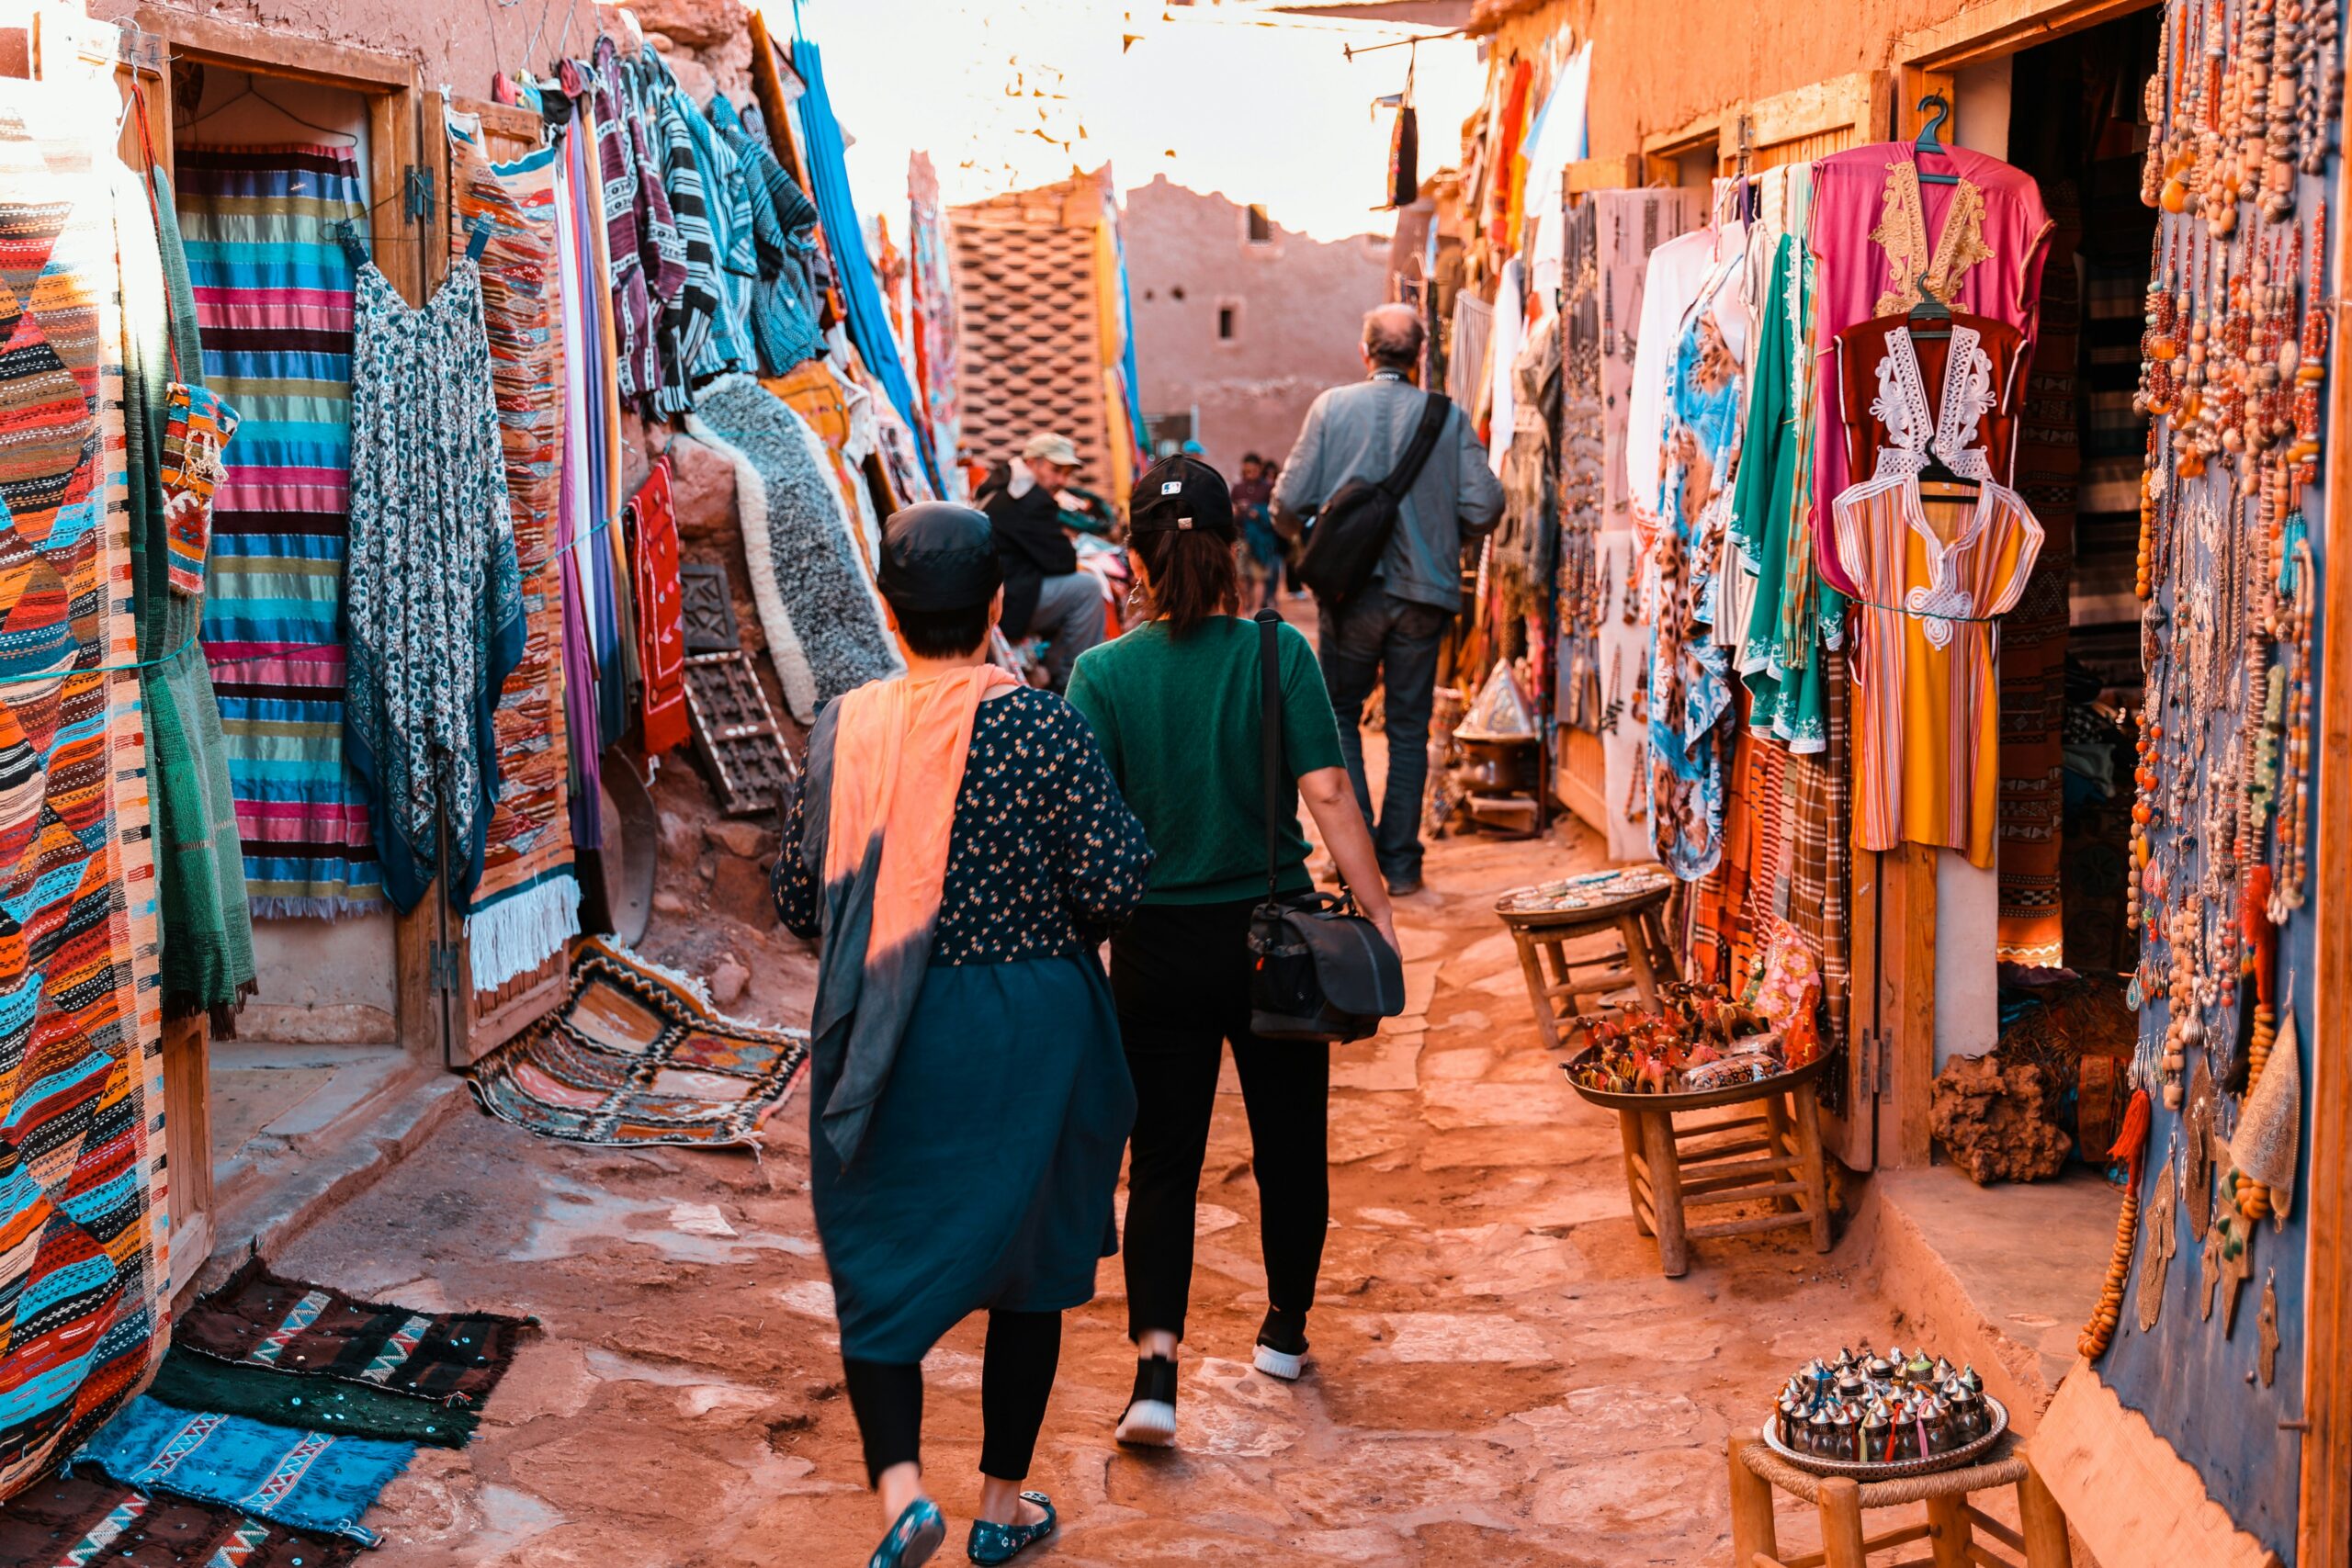 A global report draws optimistic expectations for the performance of Moroccan tourism this year